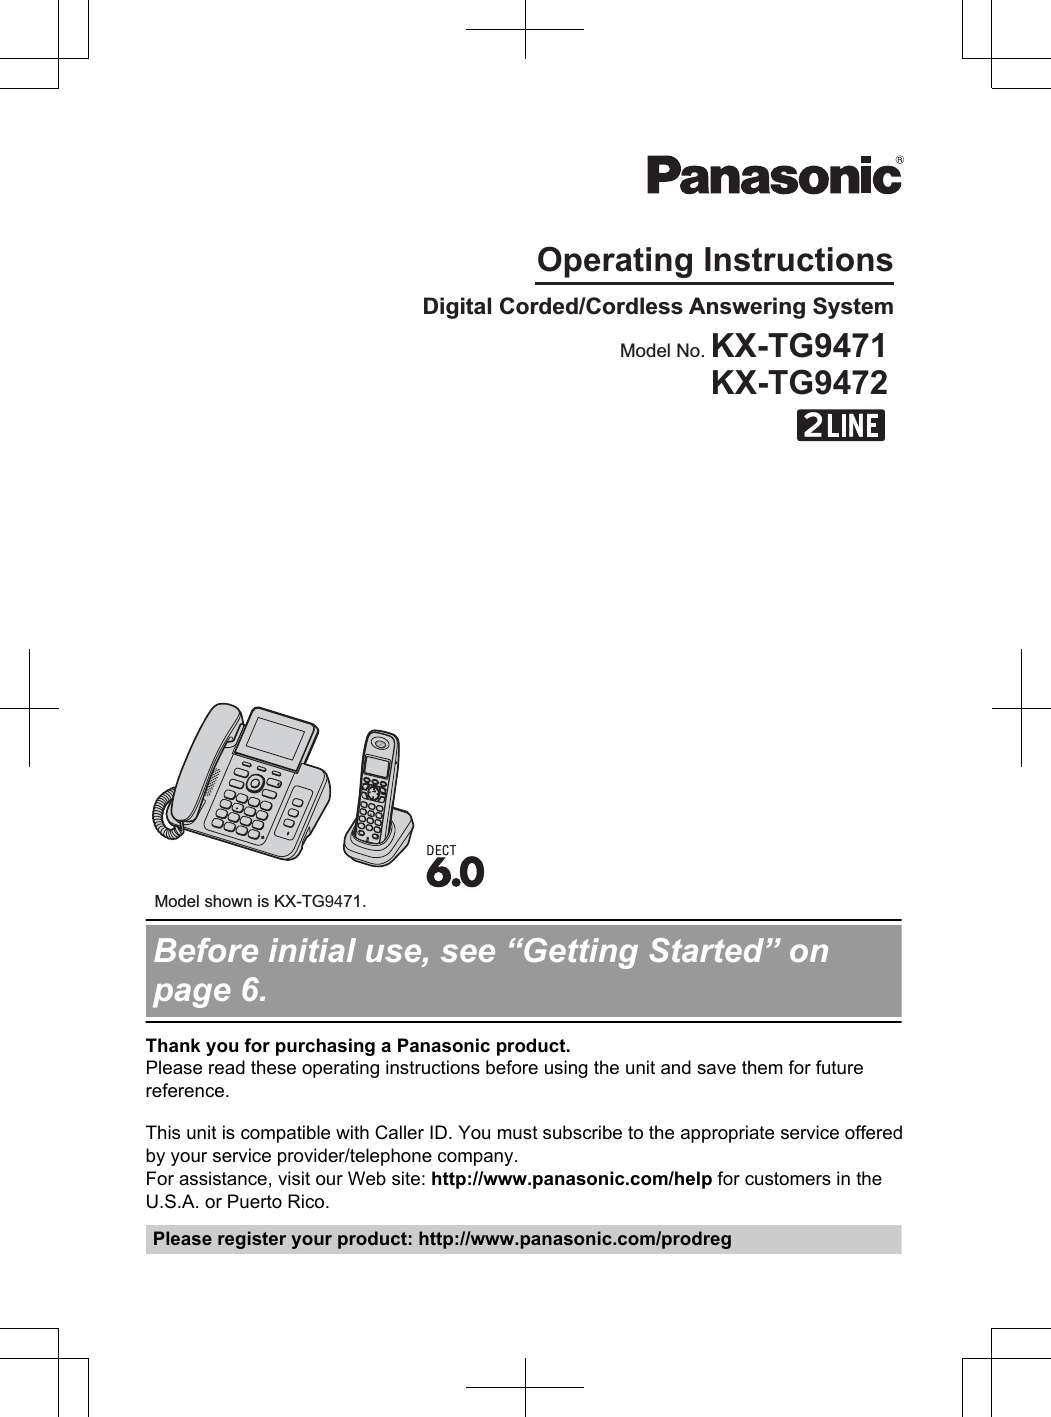 Operating InstructionsDigital Corded/Cordless Answering System Model shown is KX-TG9471.Model No. KX-TG9471KX-TG9472Before initial use, see “Getting Started” onpage 6.Thank you for purchasing a Panasonic product.Please read these operating instructions before using the unit and save them for futurereference.This unit is compatible with Caller ID. You must subscribe to the appropriate service offeredby your service provider/telephone company.For assistance, visit our Web site: http://www.panasonic.com/help for customers in theU.S.A. or Puerto Rico.Please register your product: http://www.panasonic.com/prodreg